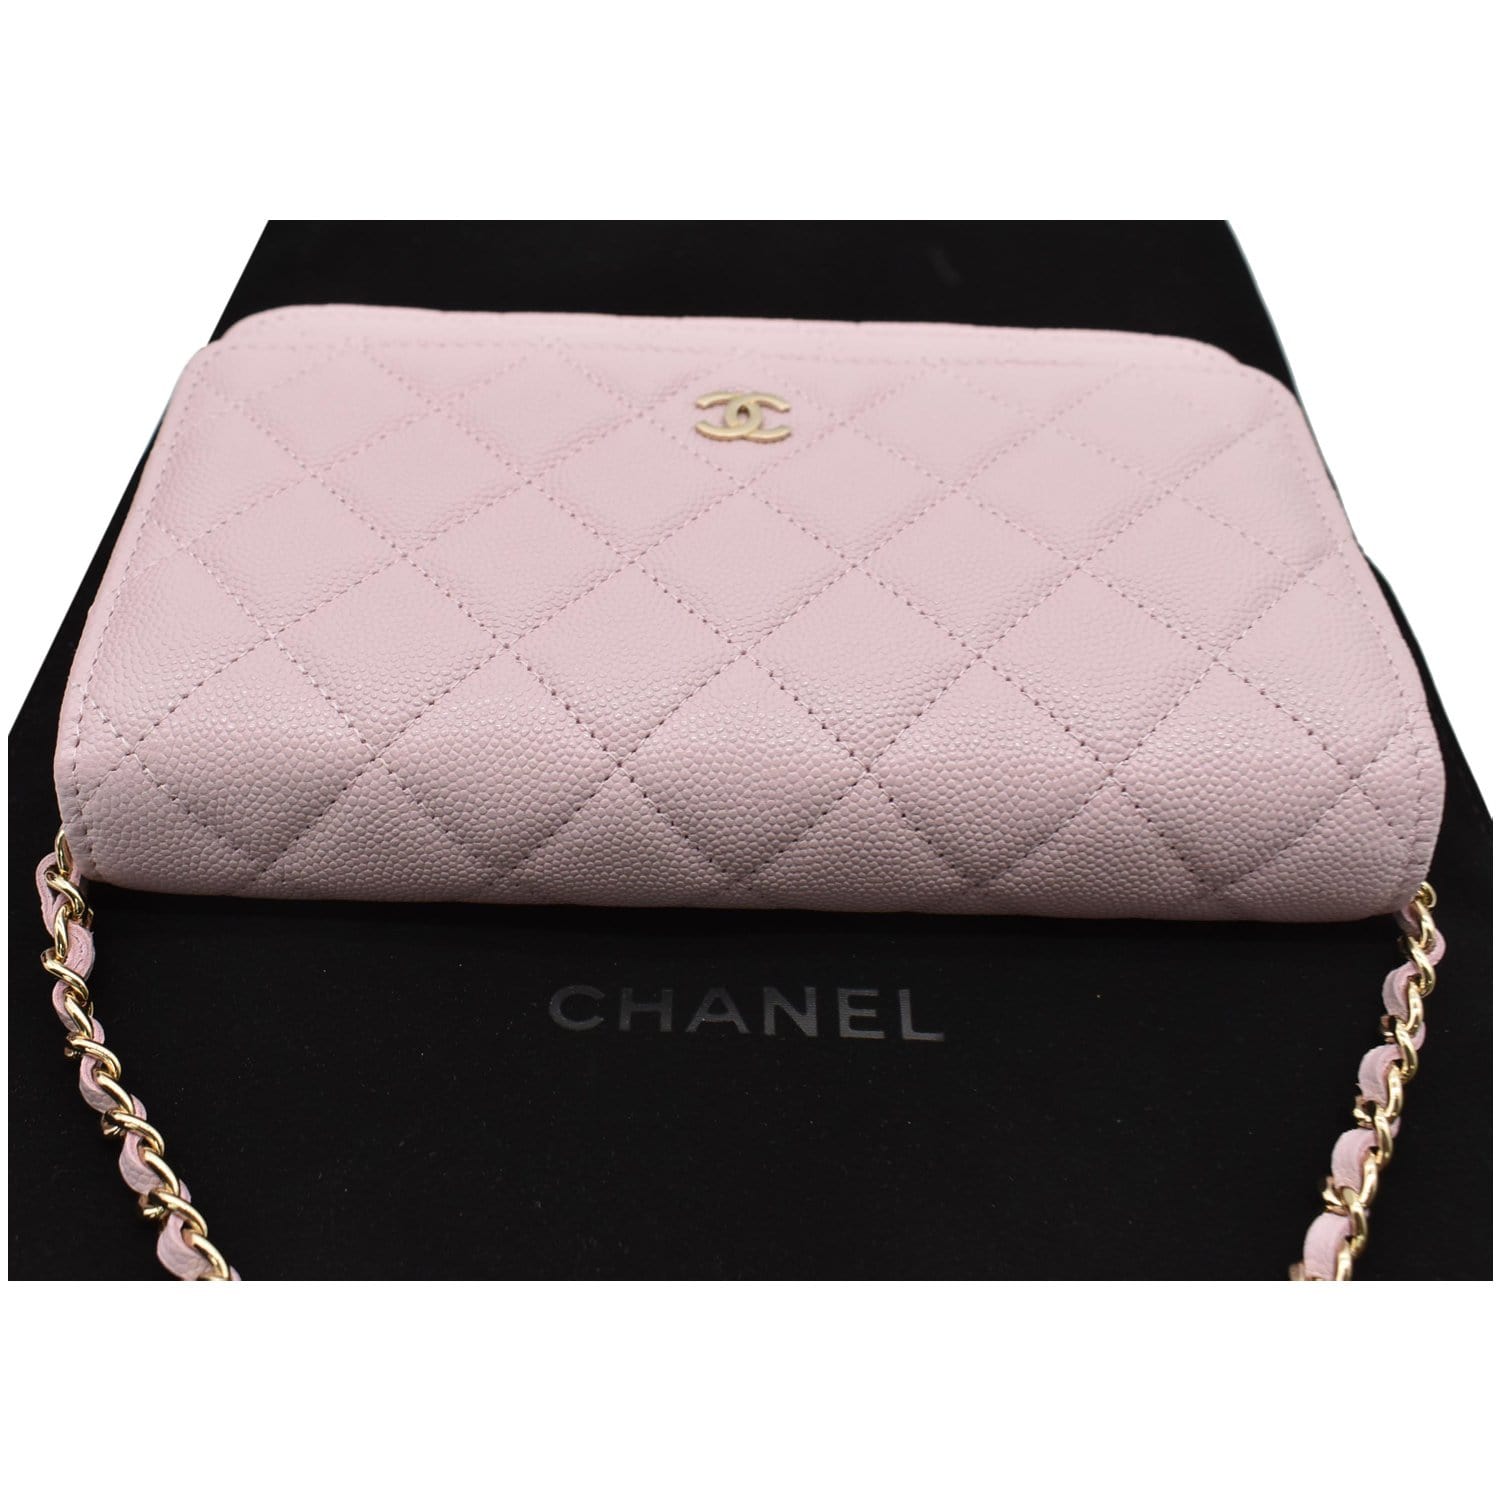 Chanel Wallet on Chain with Front Pocket, Black Caviar Leather with Gold  hardware, New in Box GA001